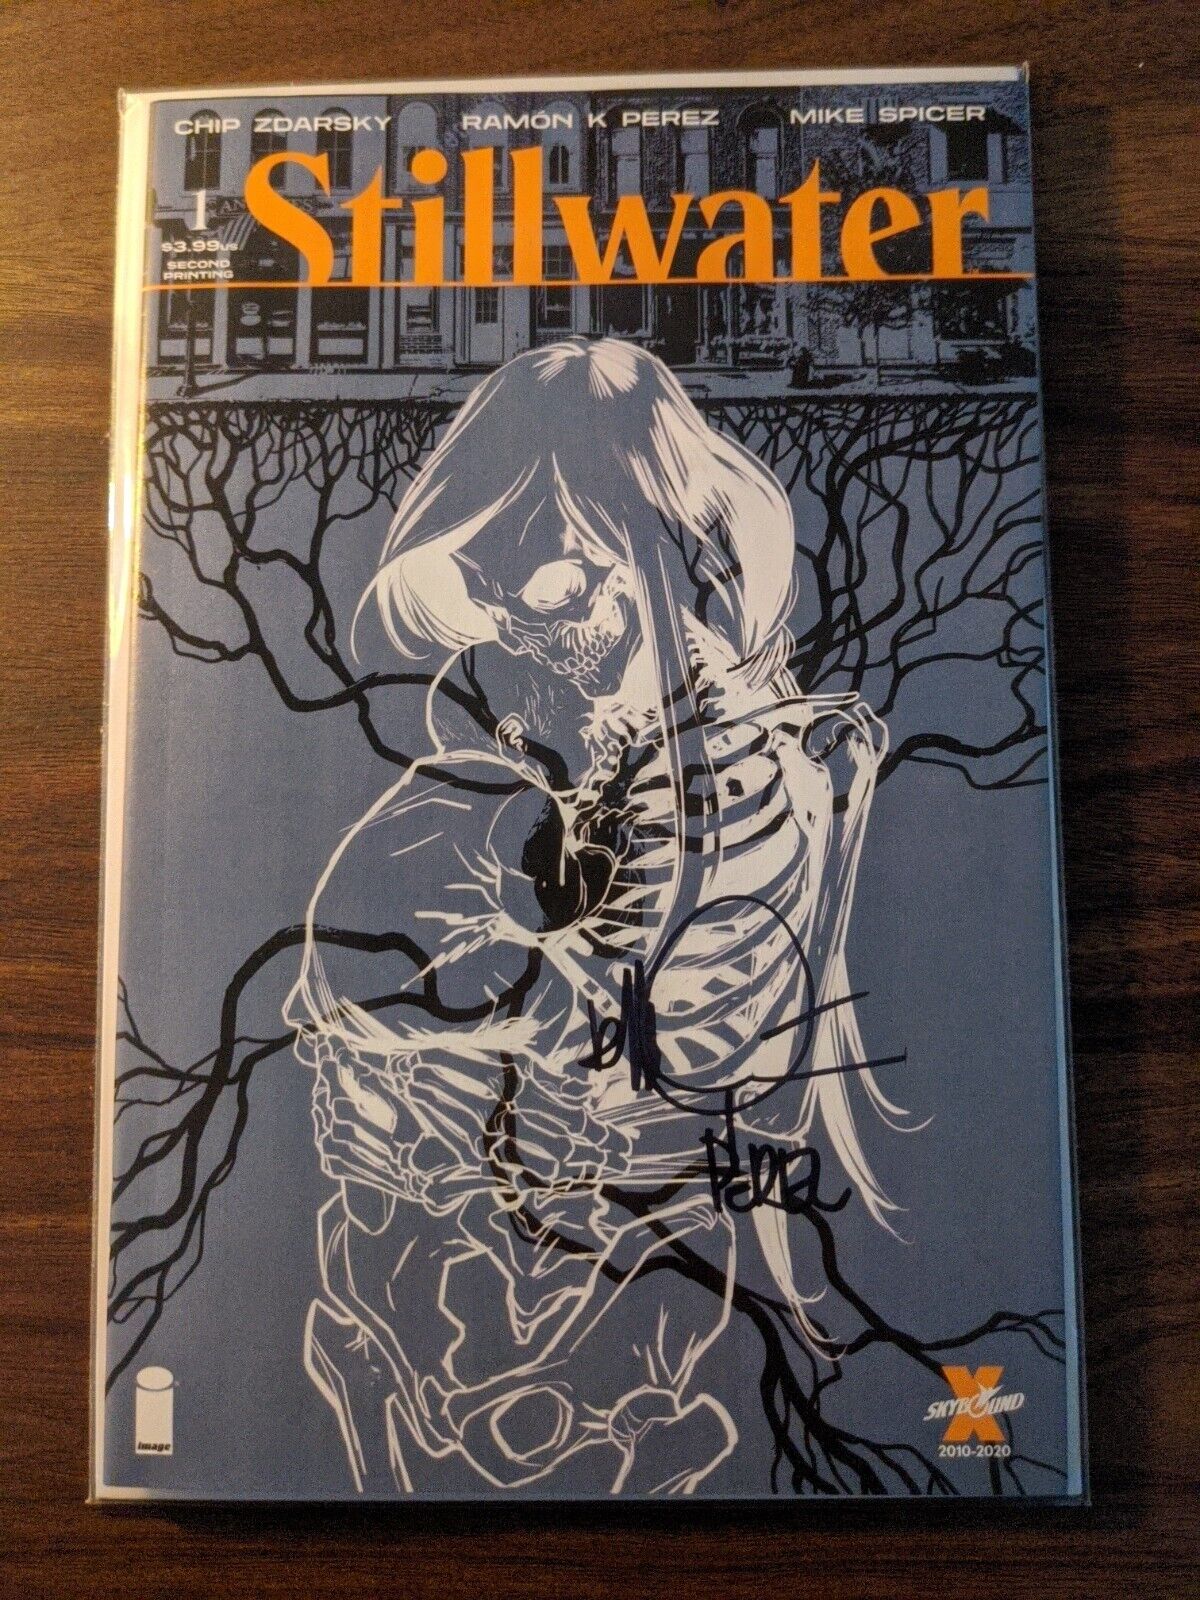 STILLWATER #1 SECOND PRINT COVER A HARD TO FIND. Signed Ramon Perez